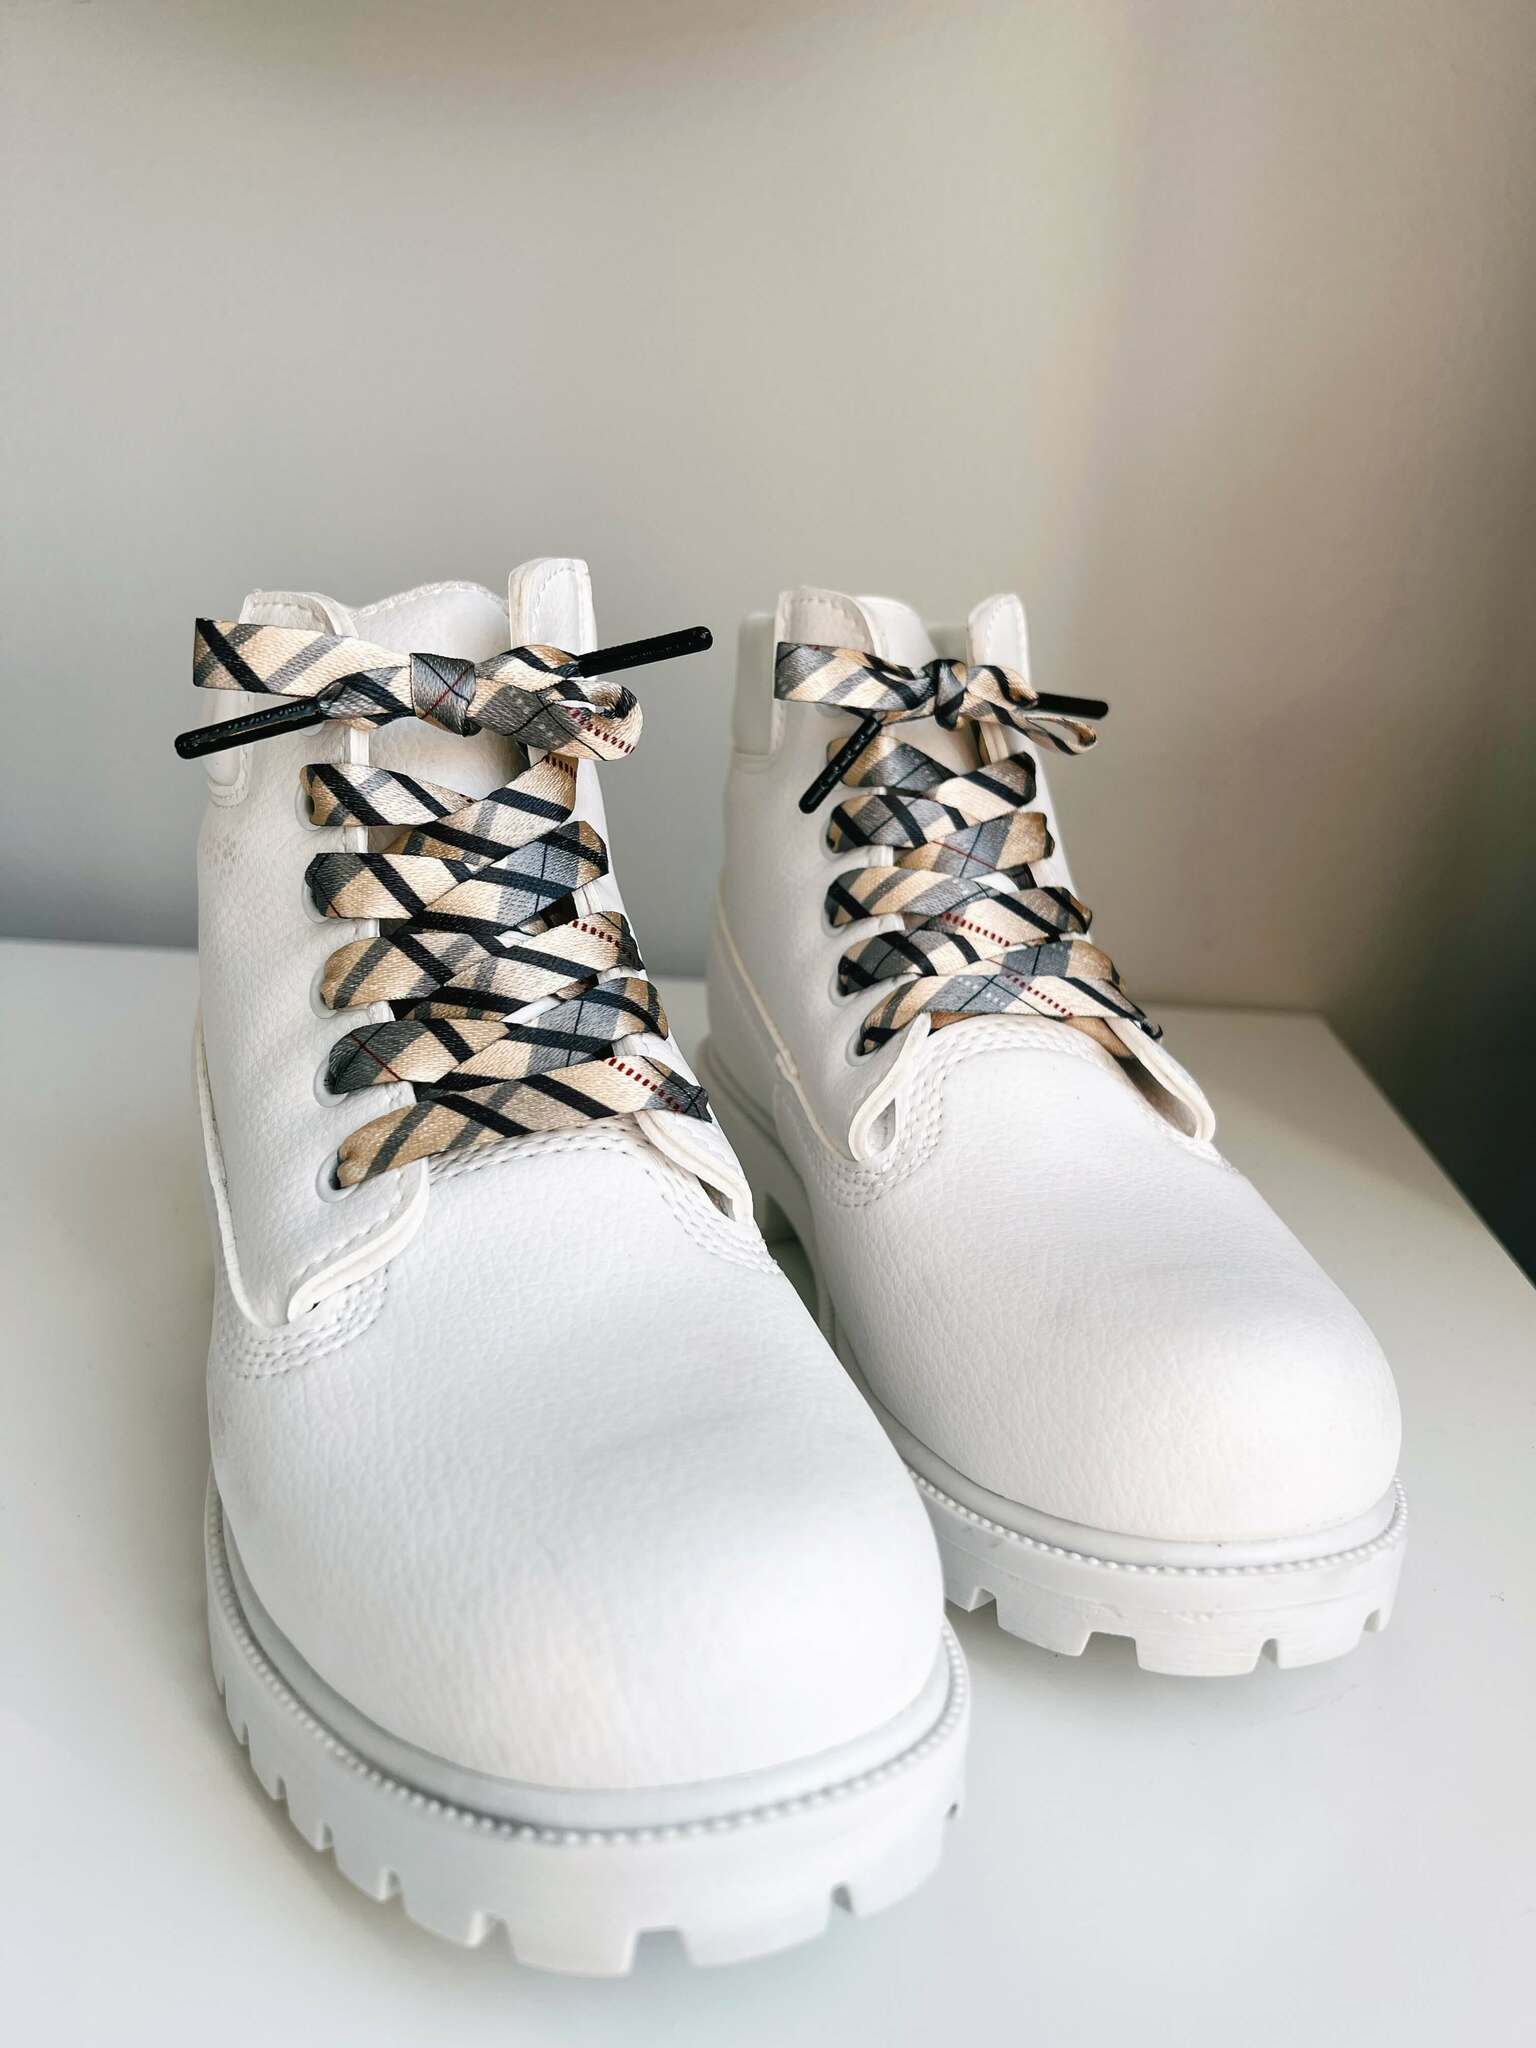 Checkered beige patterned shoelaces - The Shoelace Brand